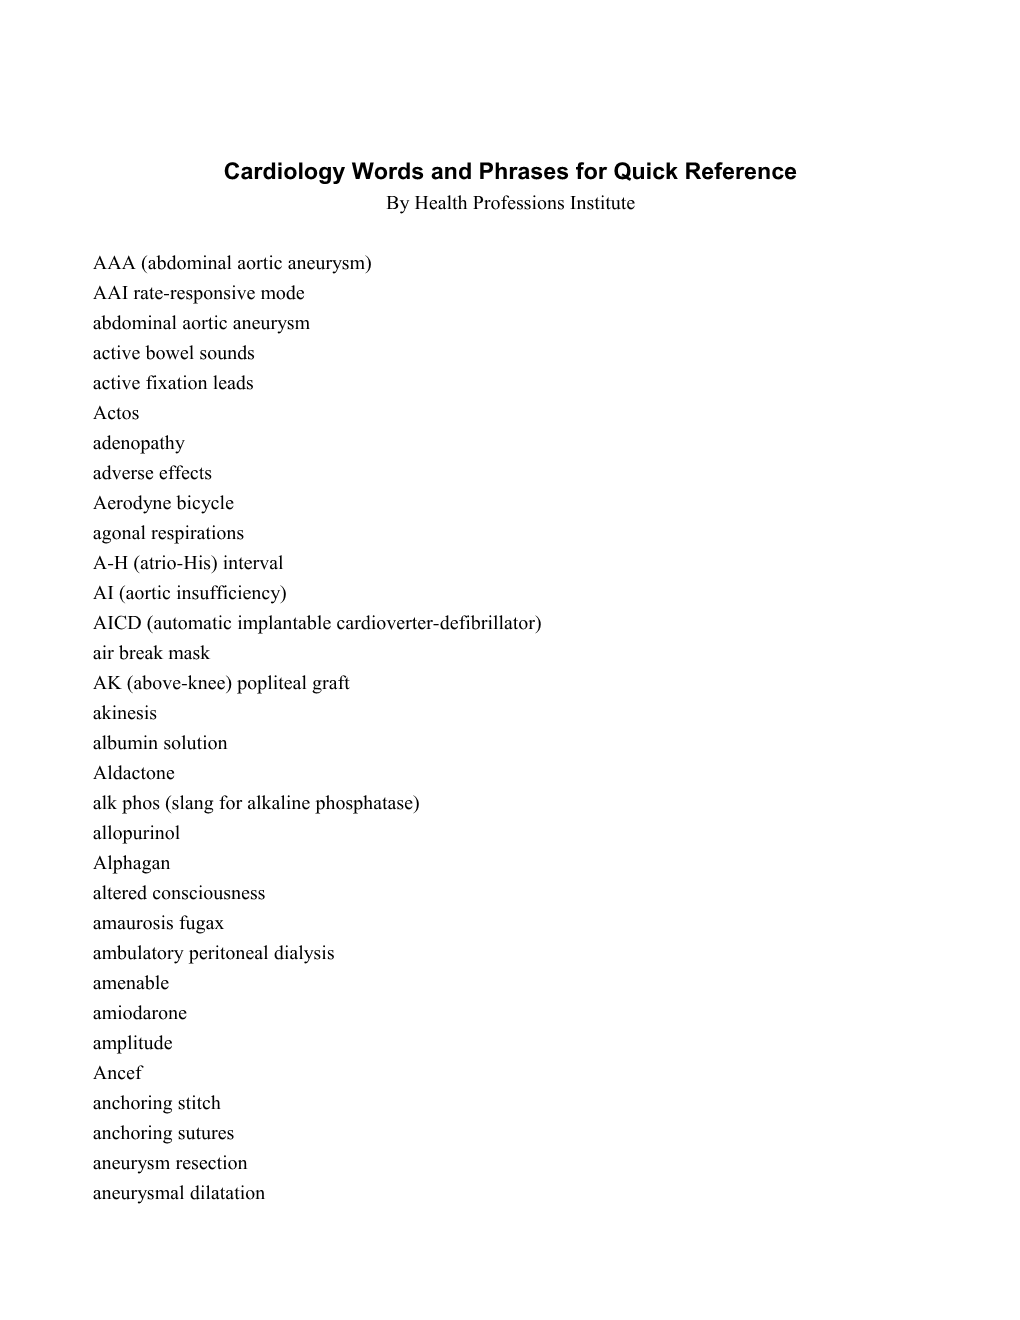 Cardiology Words and Phrases for Quick Reference